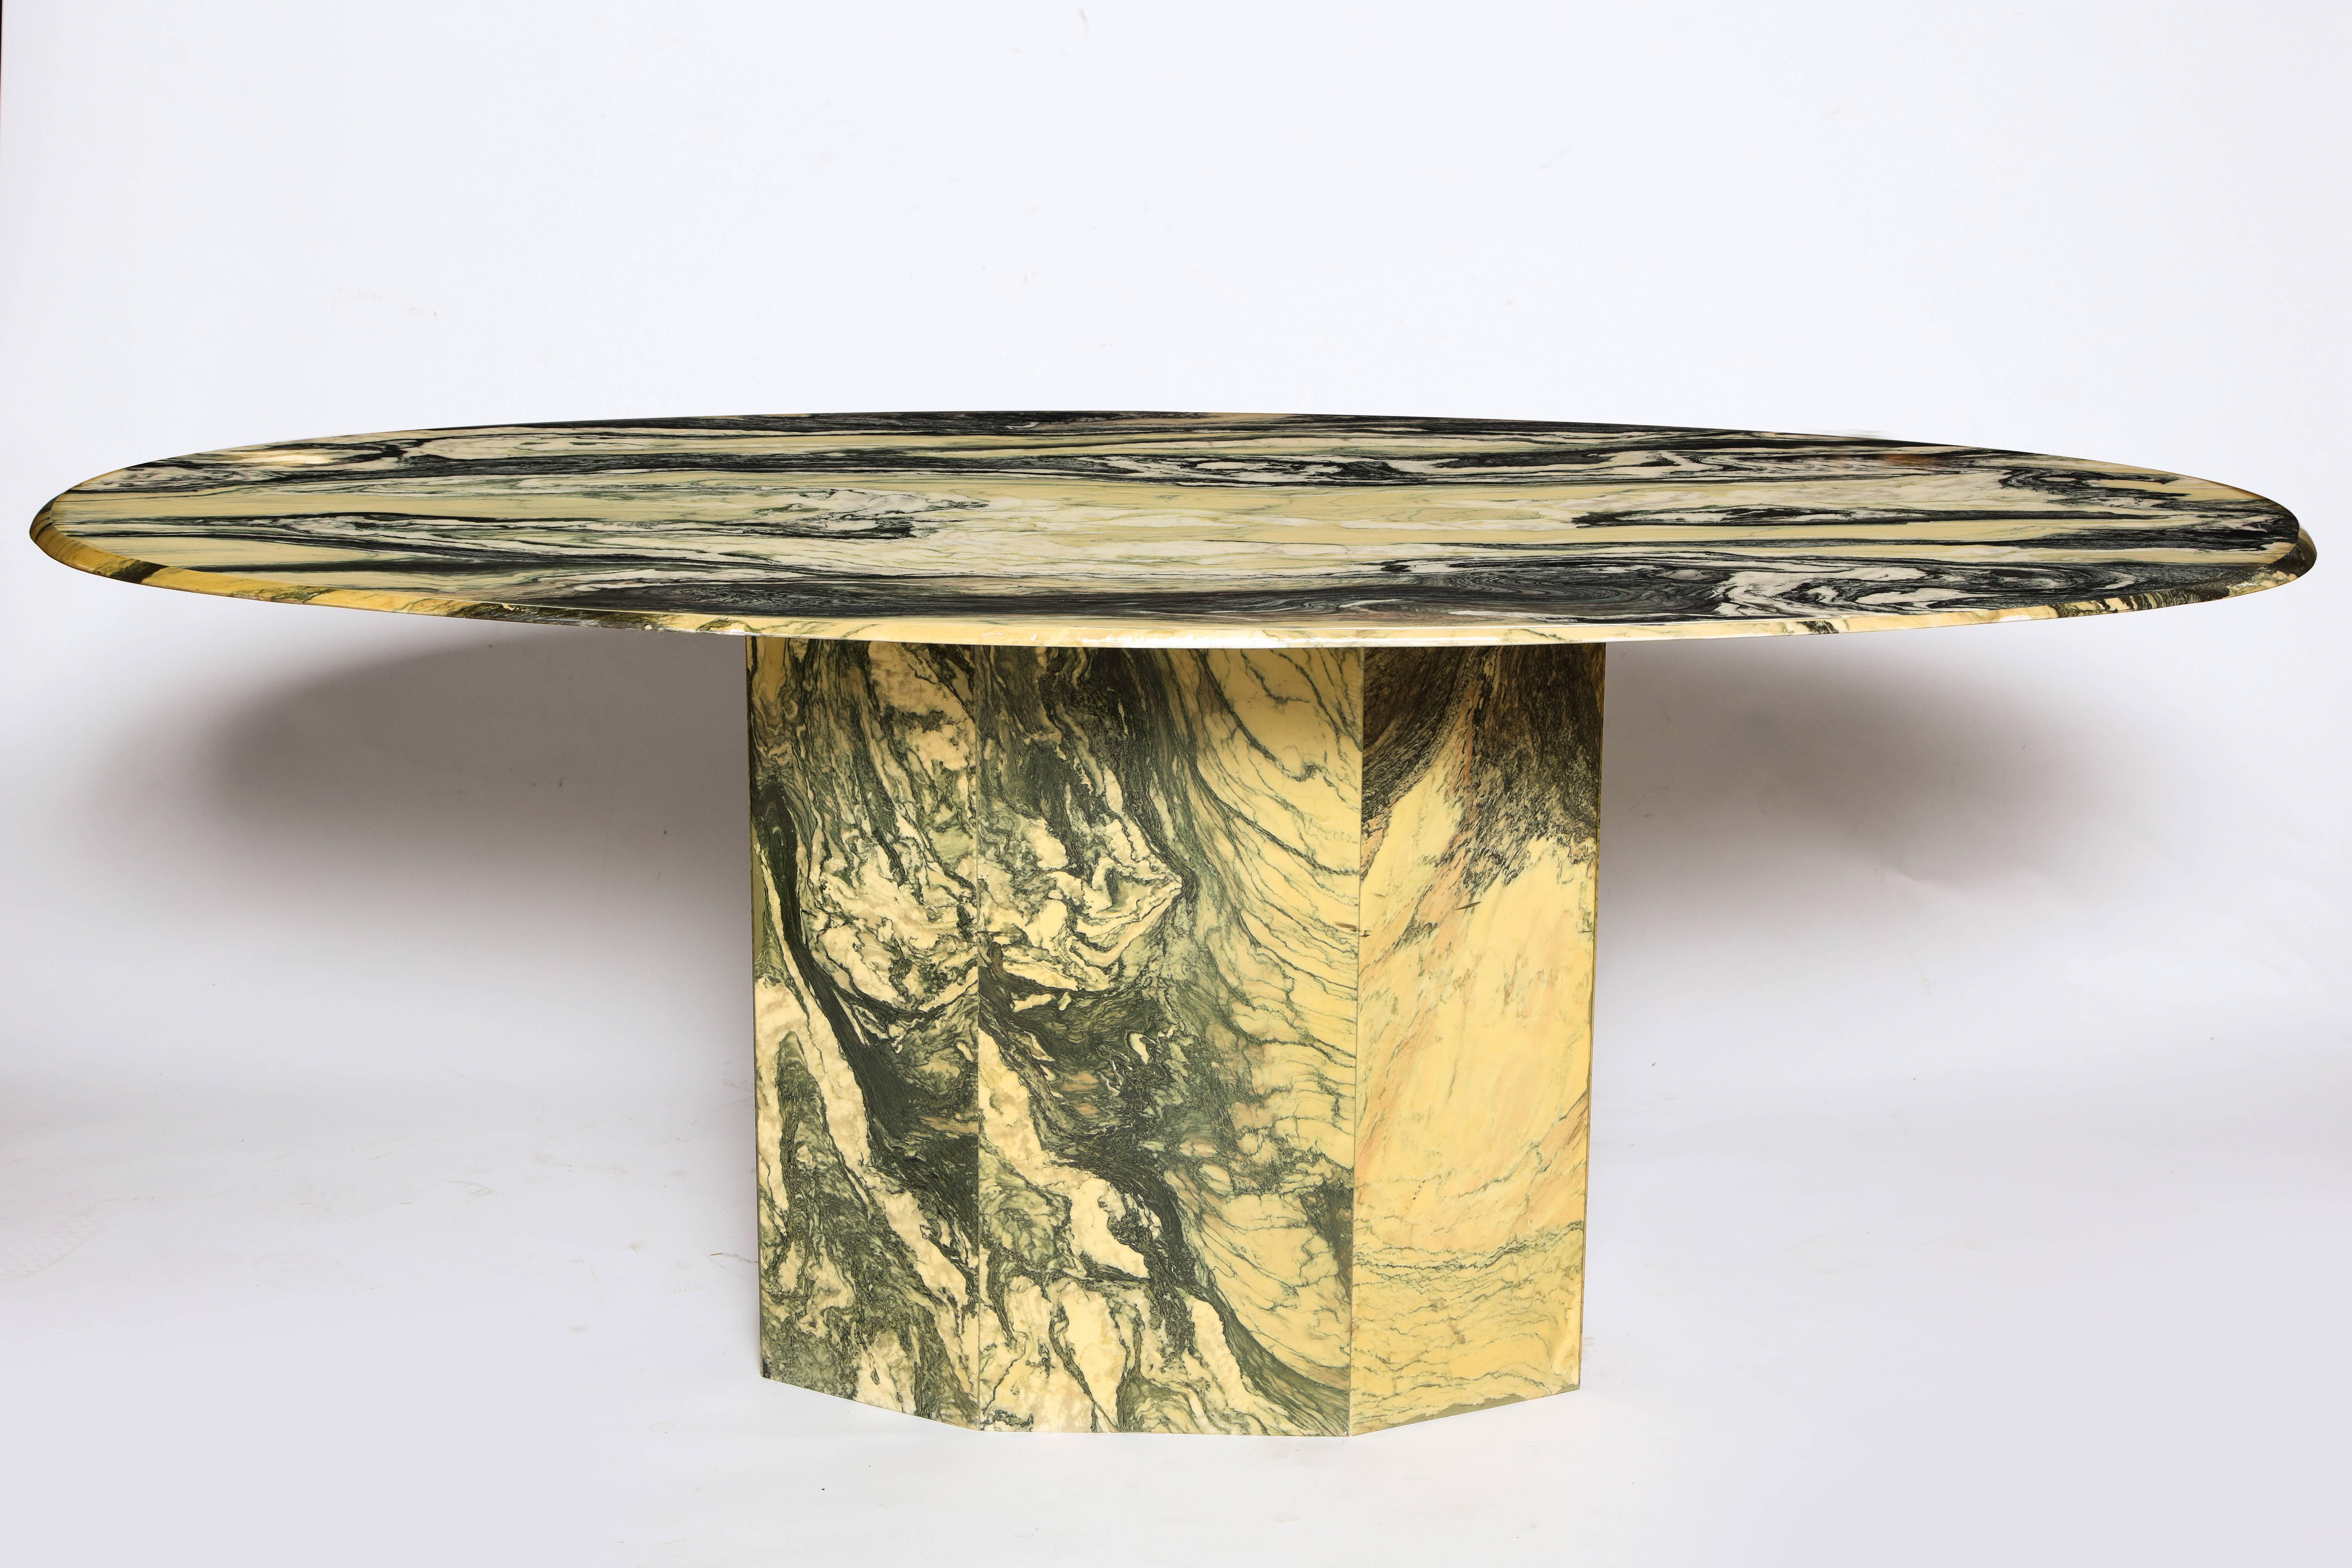 Organic French white black cream marble dining table desk, 1980s, France

Incredible organic Veining on this table with an array of colors that match any decor. Made in France in the 1980s.